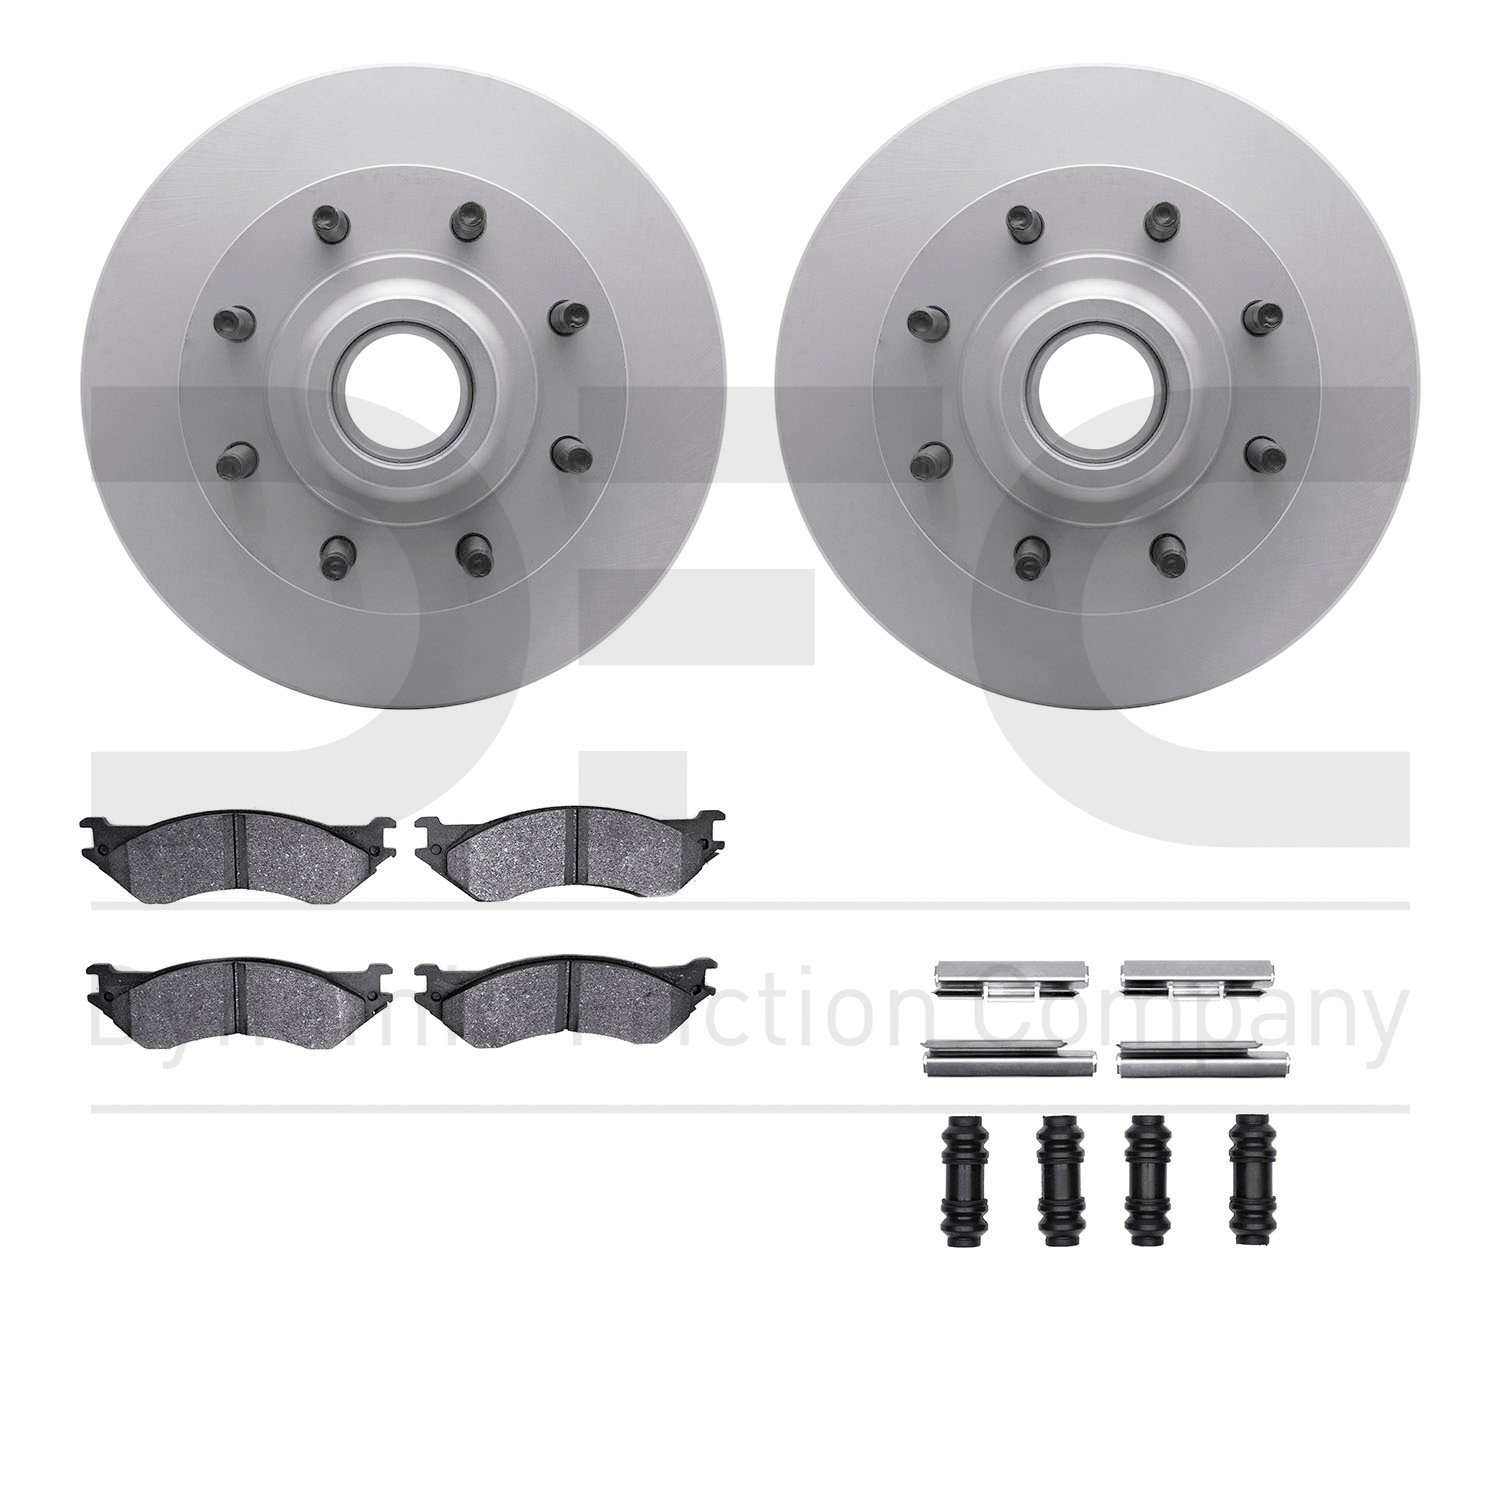 4412-54010 Geospec Brake Rotors with Ultimate-Duty Brake Pads & Hardware, 2000-2004 Ford/Lincoln/Mercury/Mazda, Position: Front